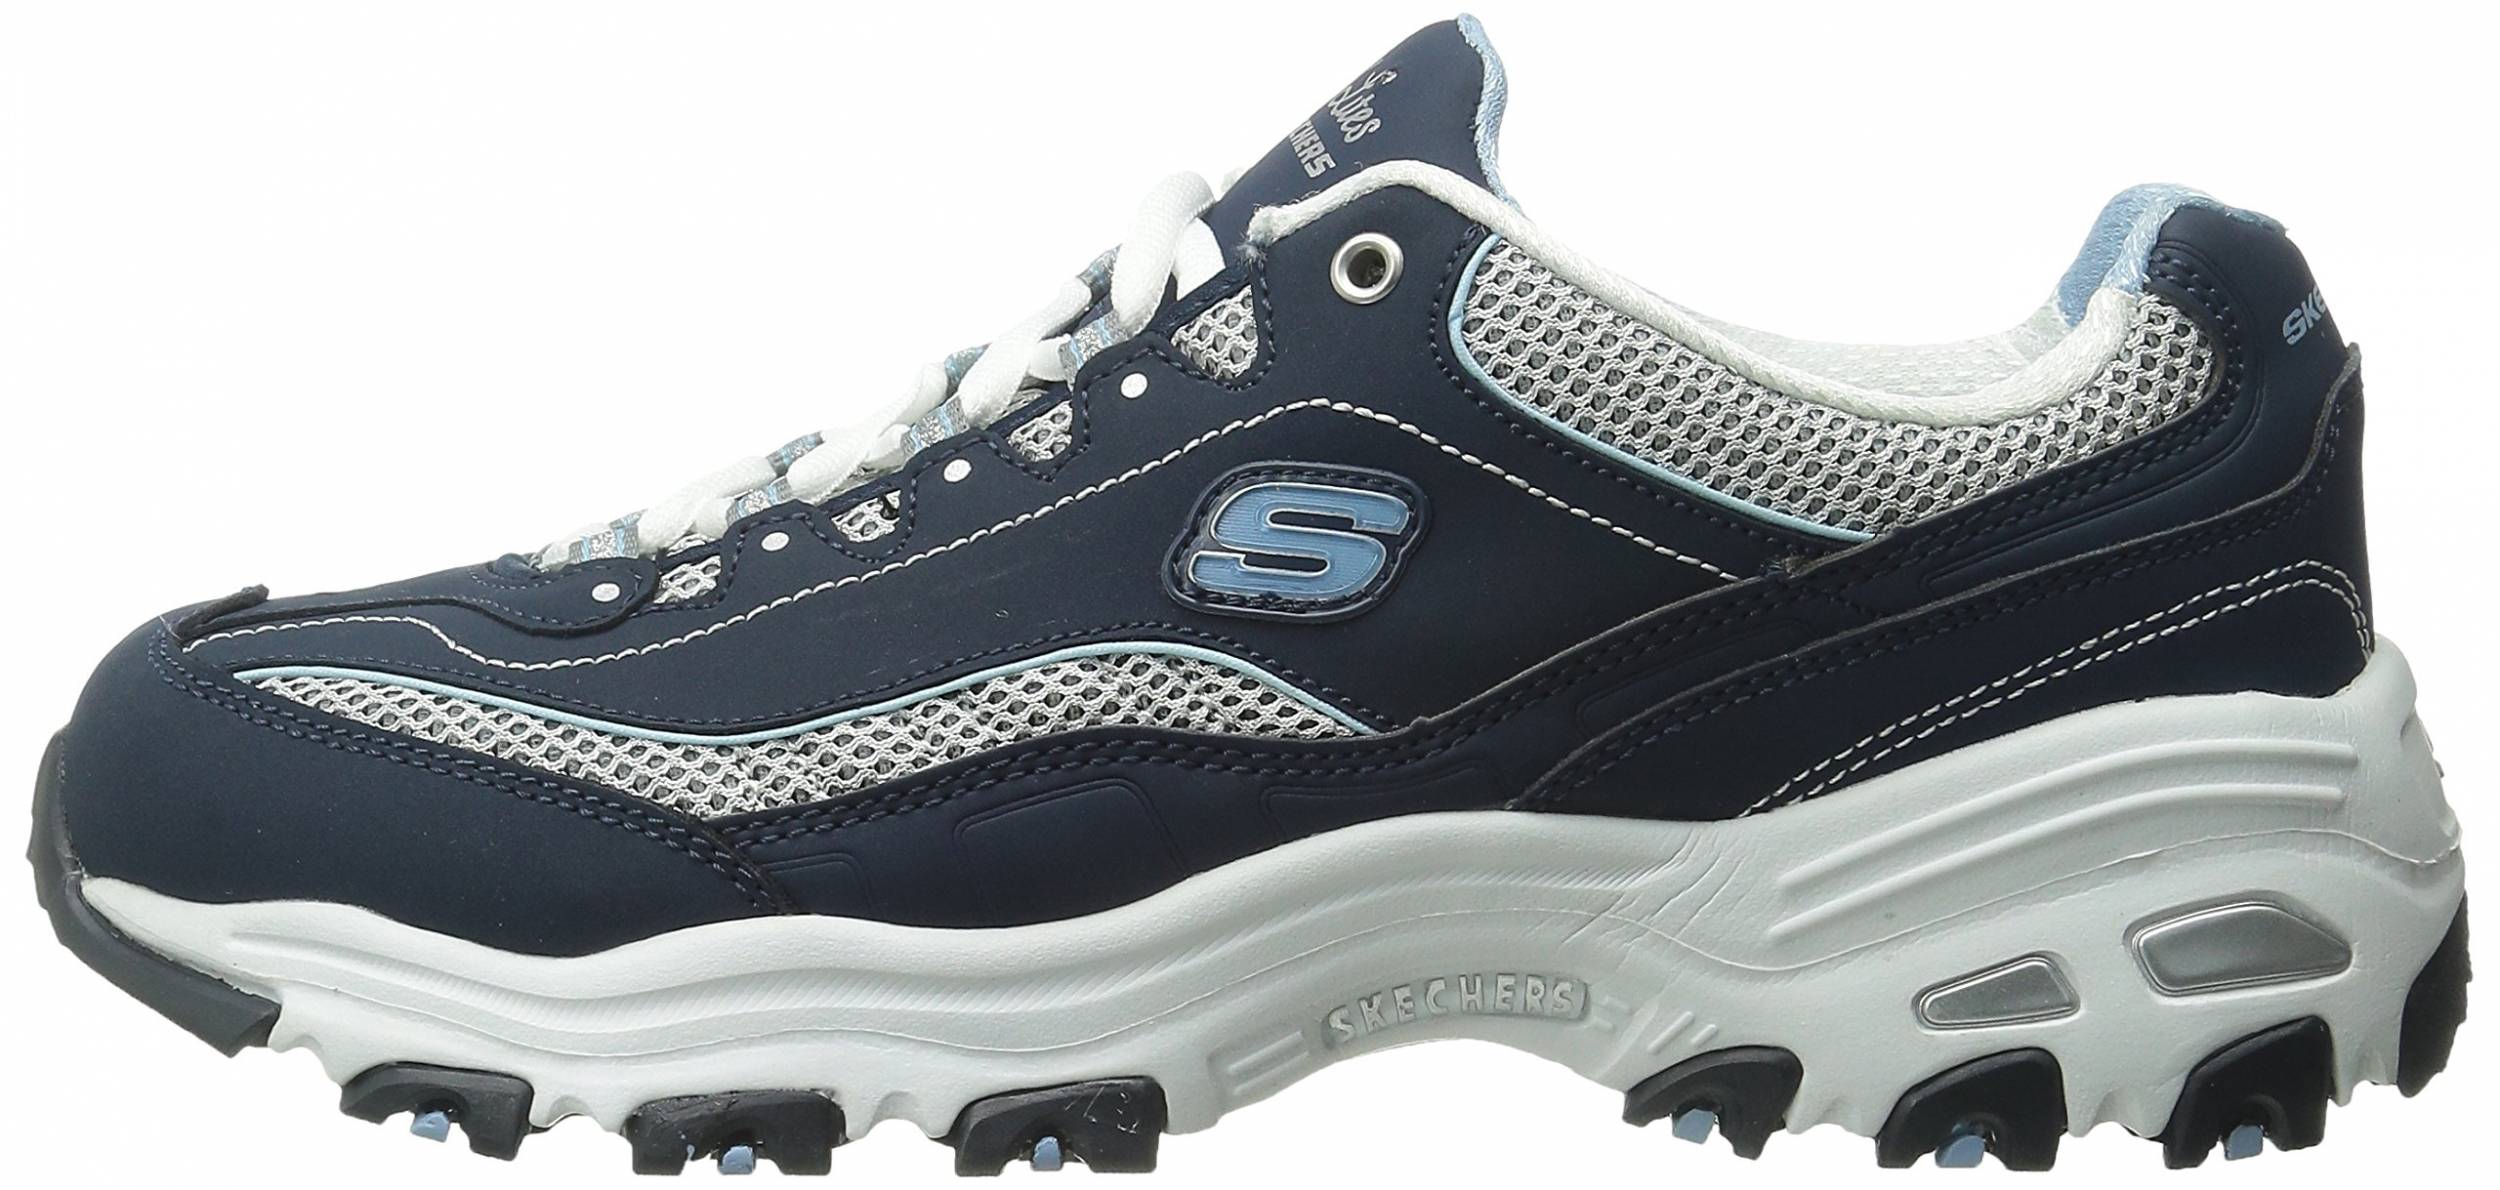 Caution Grind Be satisfied Skechers D'Lites - Life Saver sneakers in 3 colors (only $52) | RunRepeat